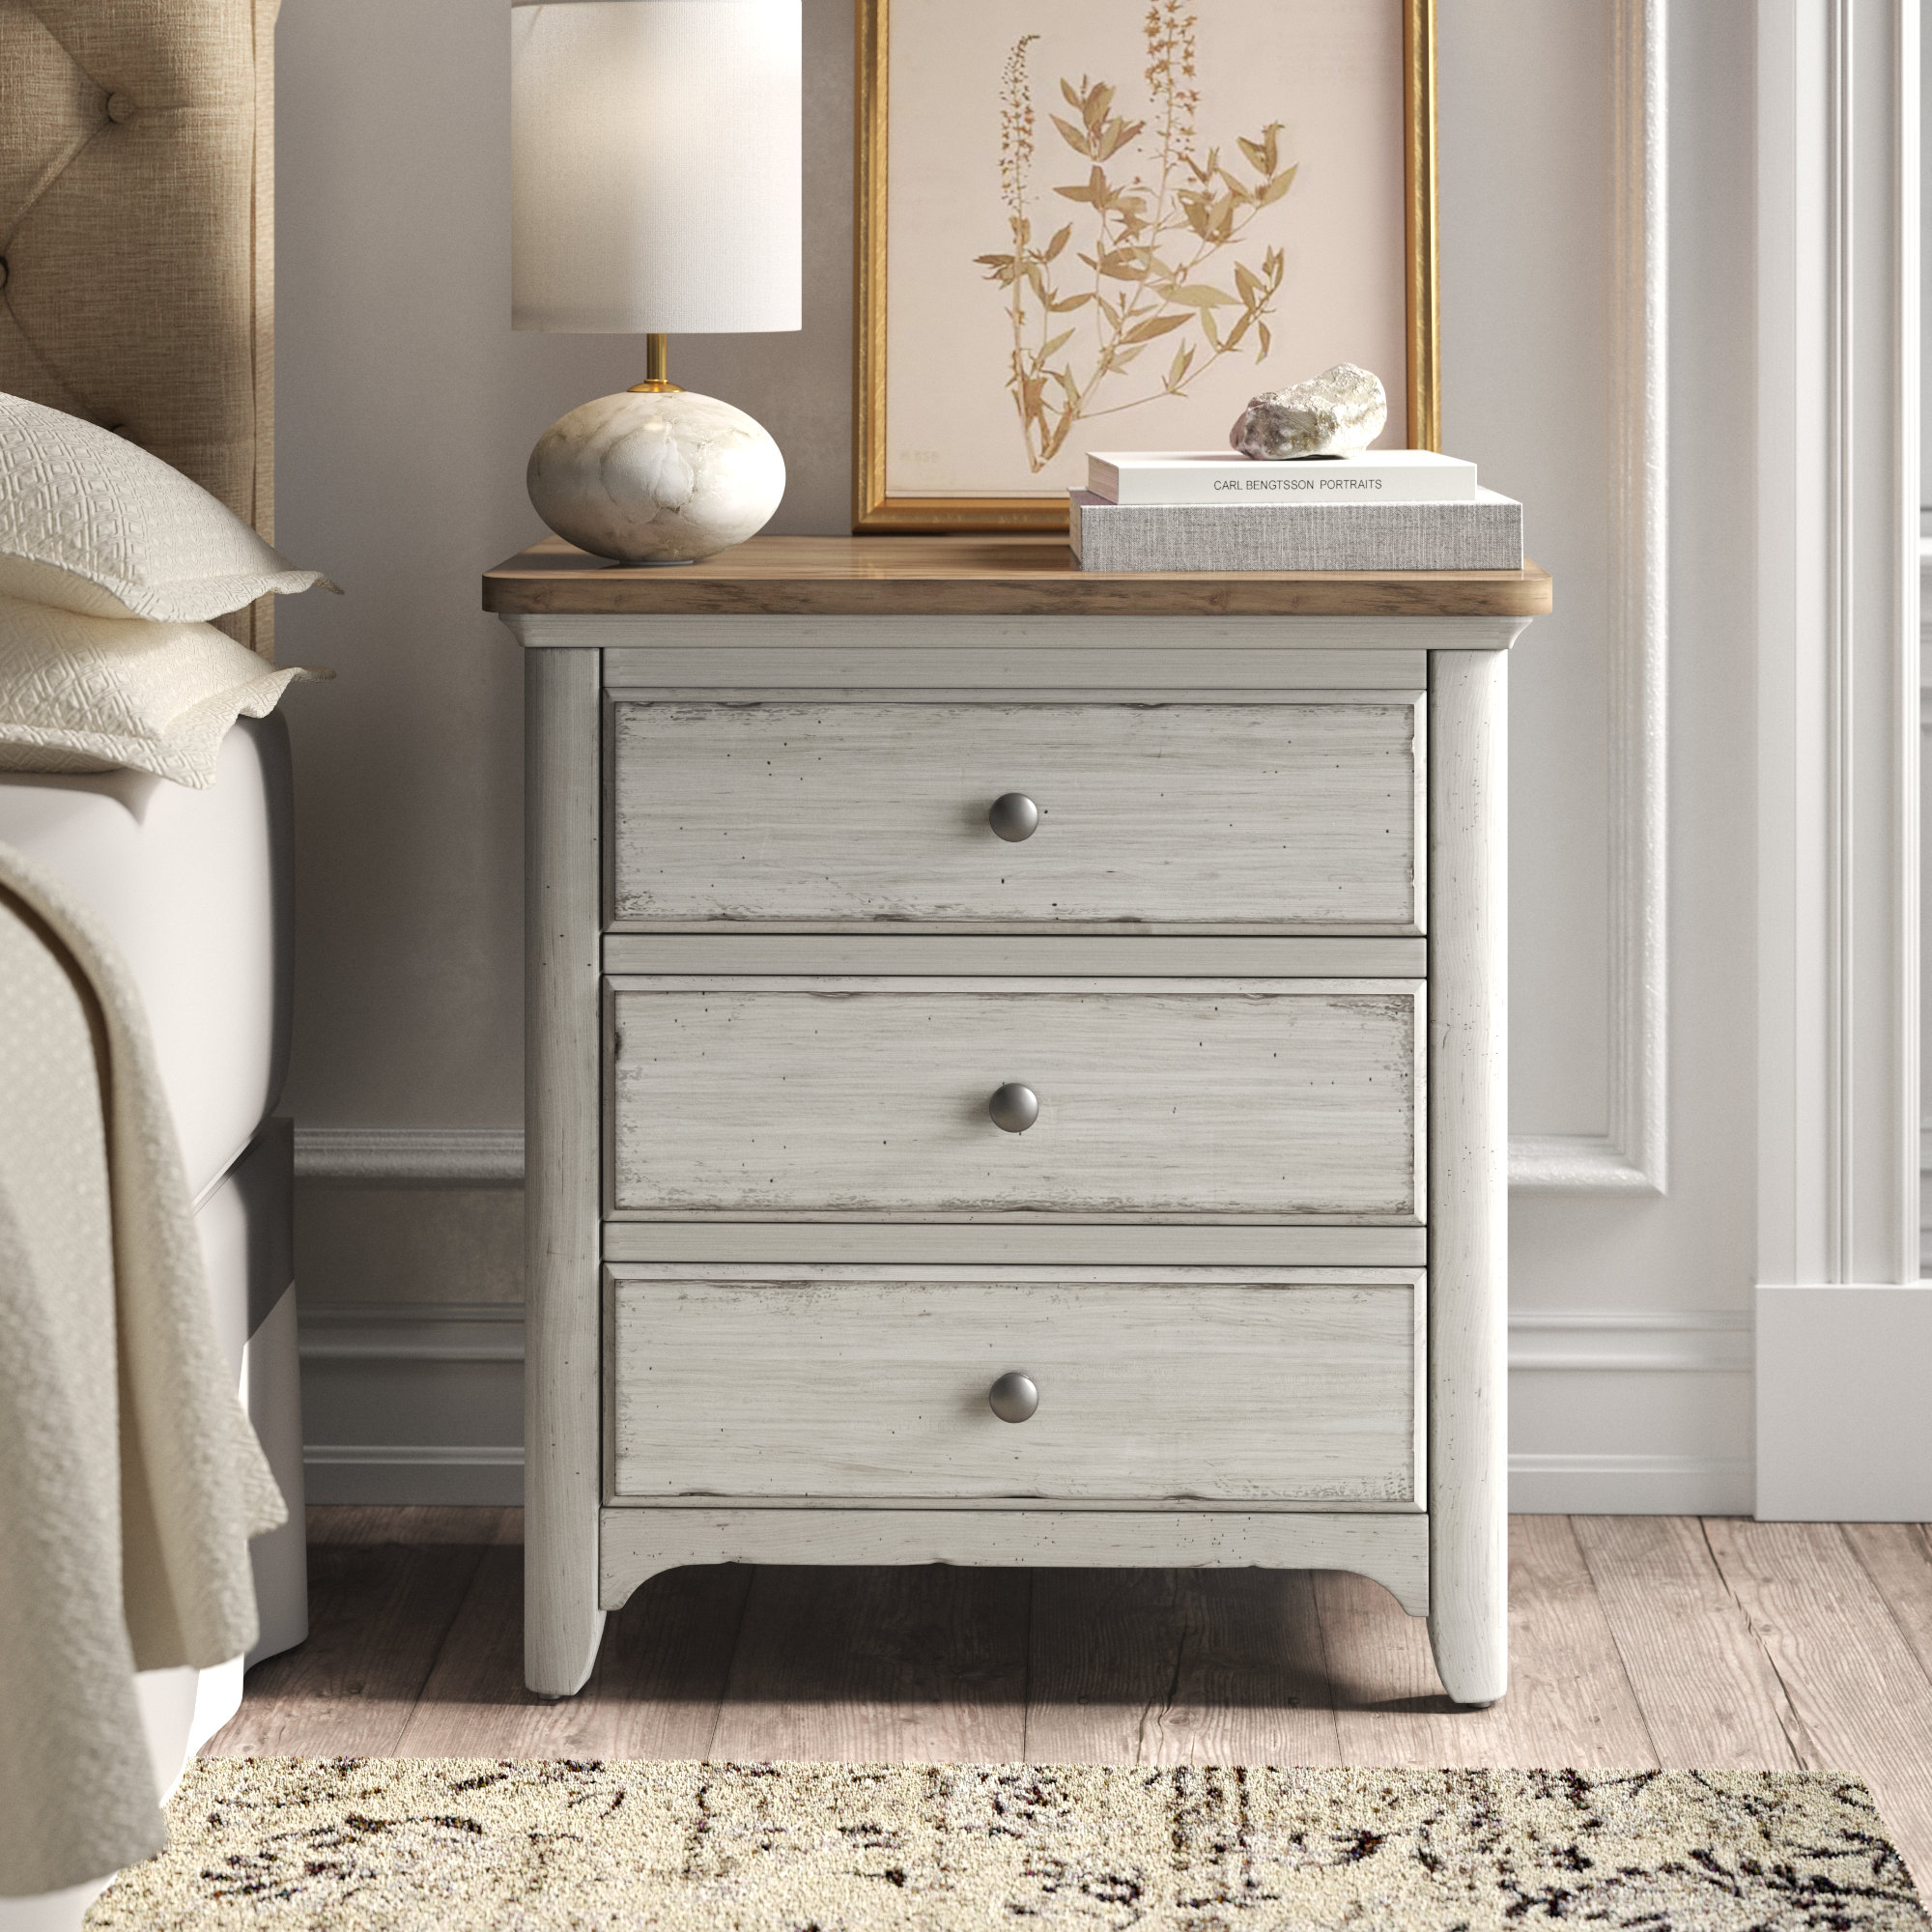 Shabby Chic White Wooden Bedside Chest 2 Drawer Side Table Bedroom Hallway 